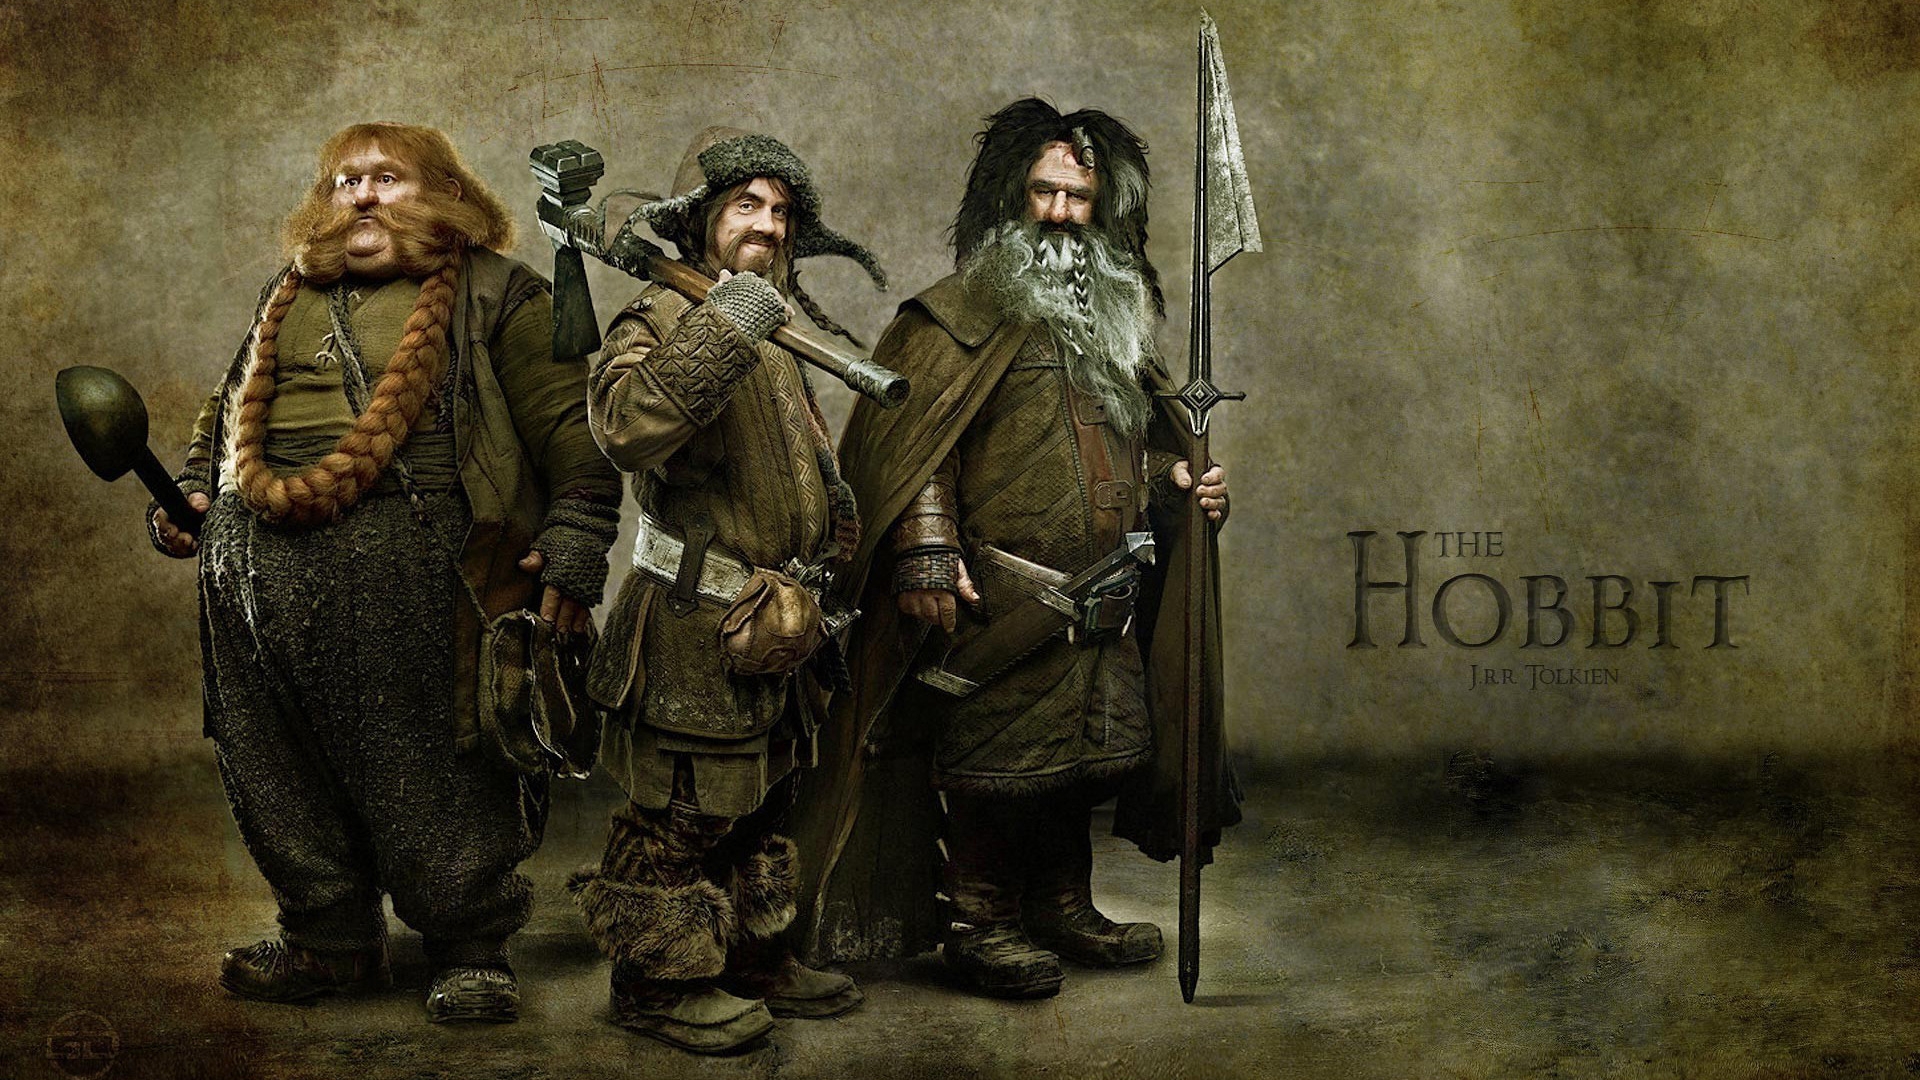 The Hobbit Characters for 1920 x 1080 HDTV 1080p resolution